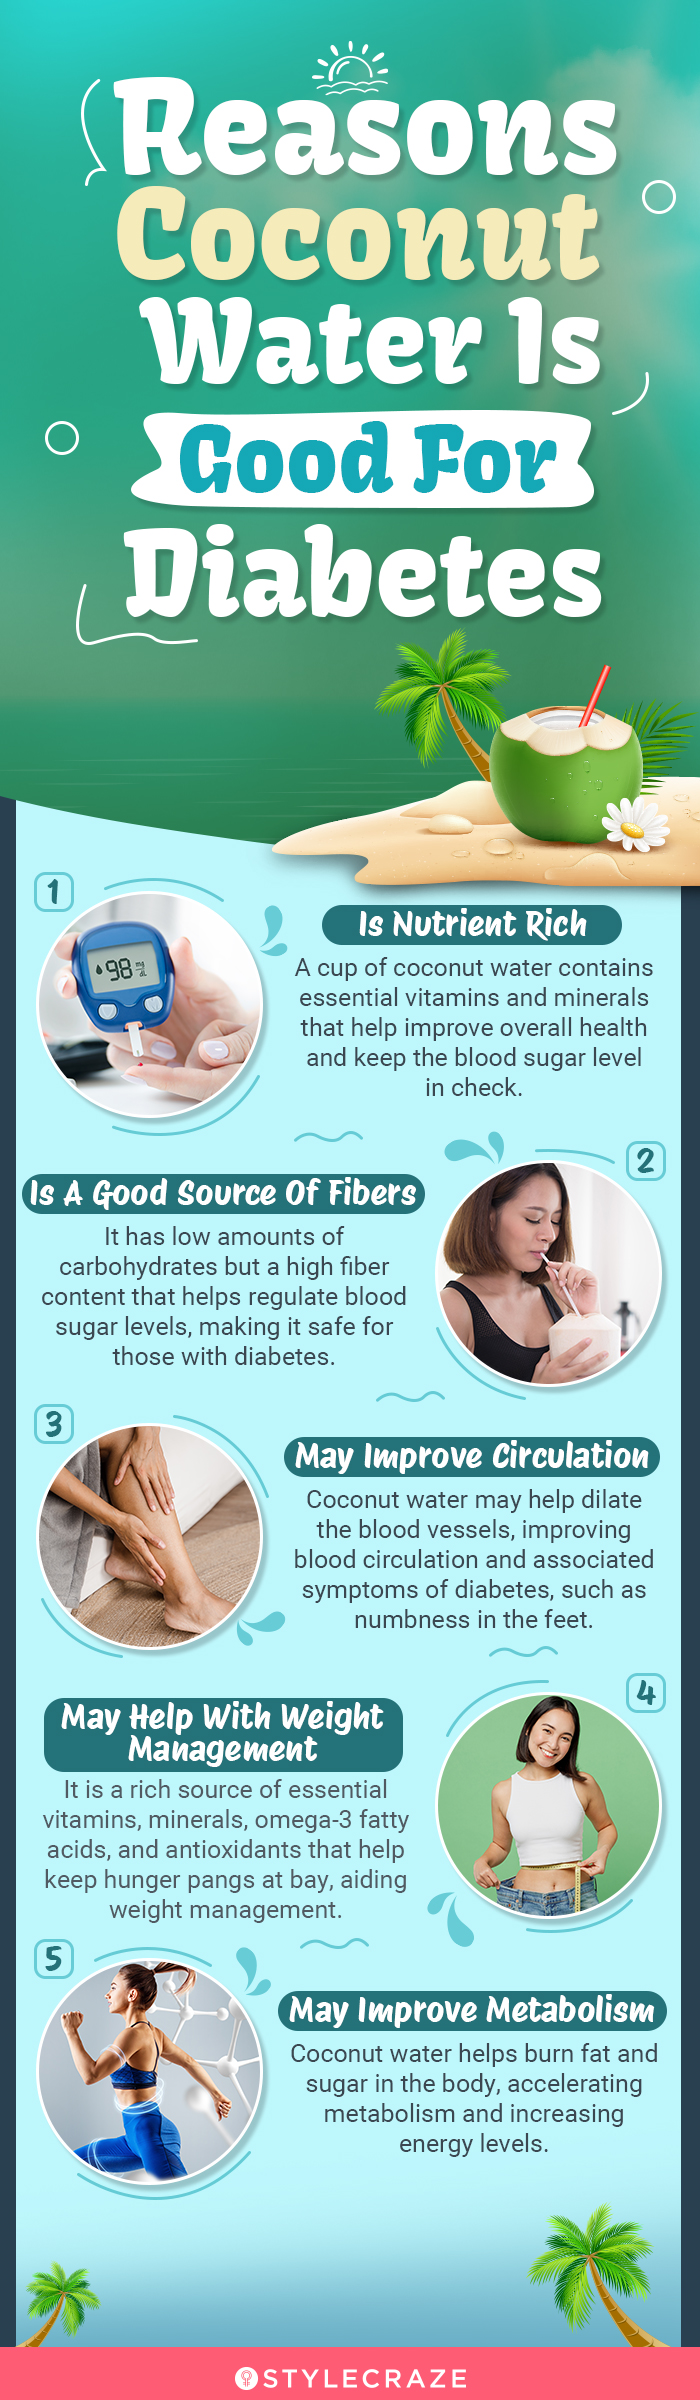 reasons coconut water is good for diabetes (infographic)